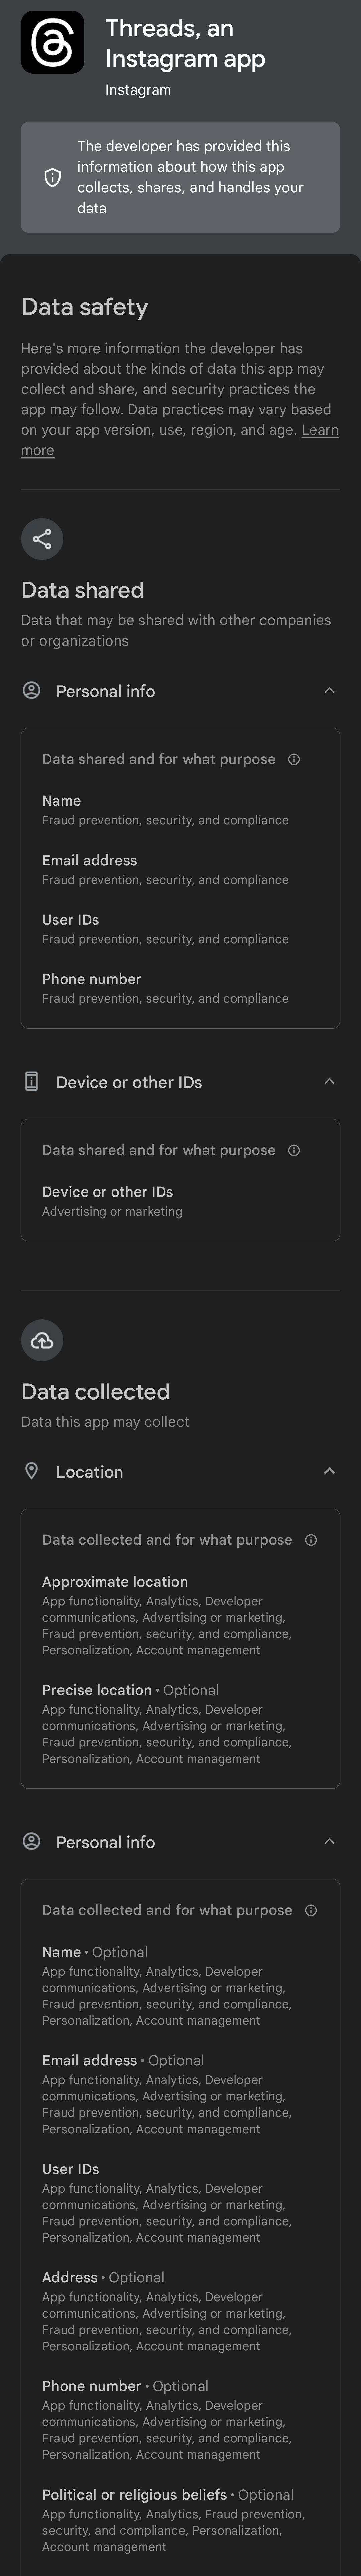 A screenshot of the data privacy page for the Threads app, as listed in the Google Play Store.